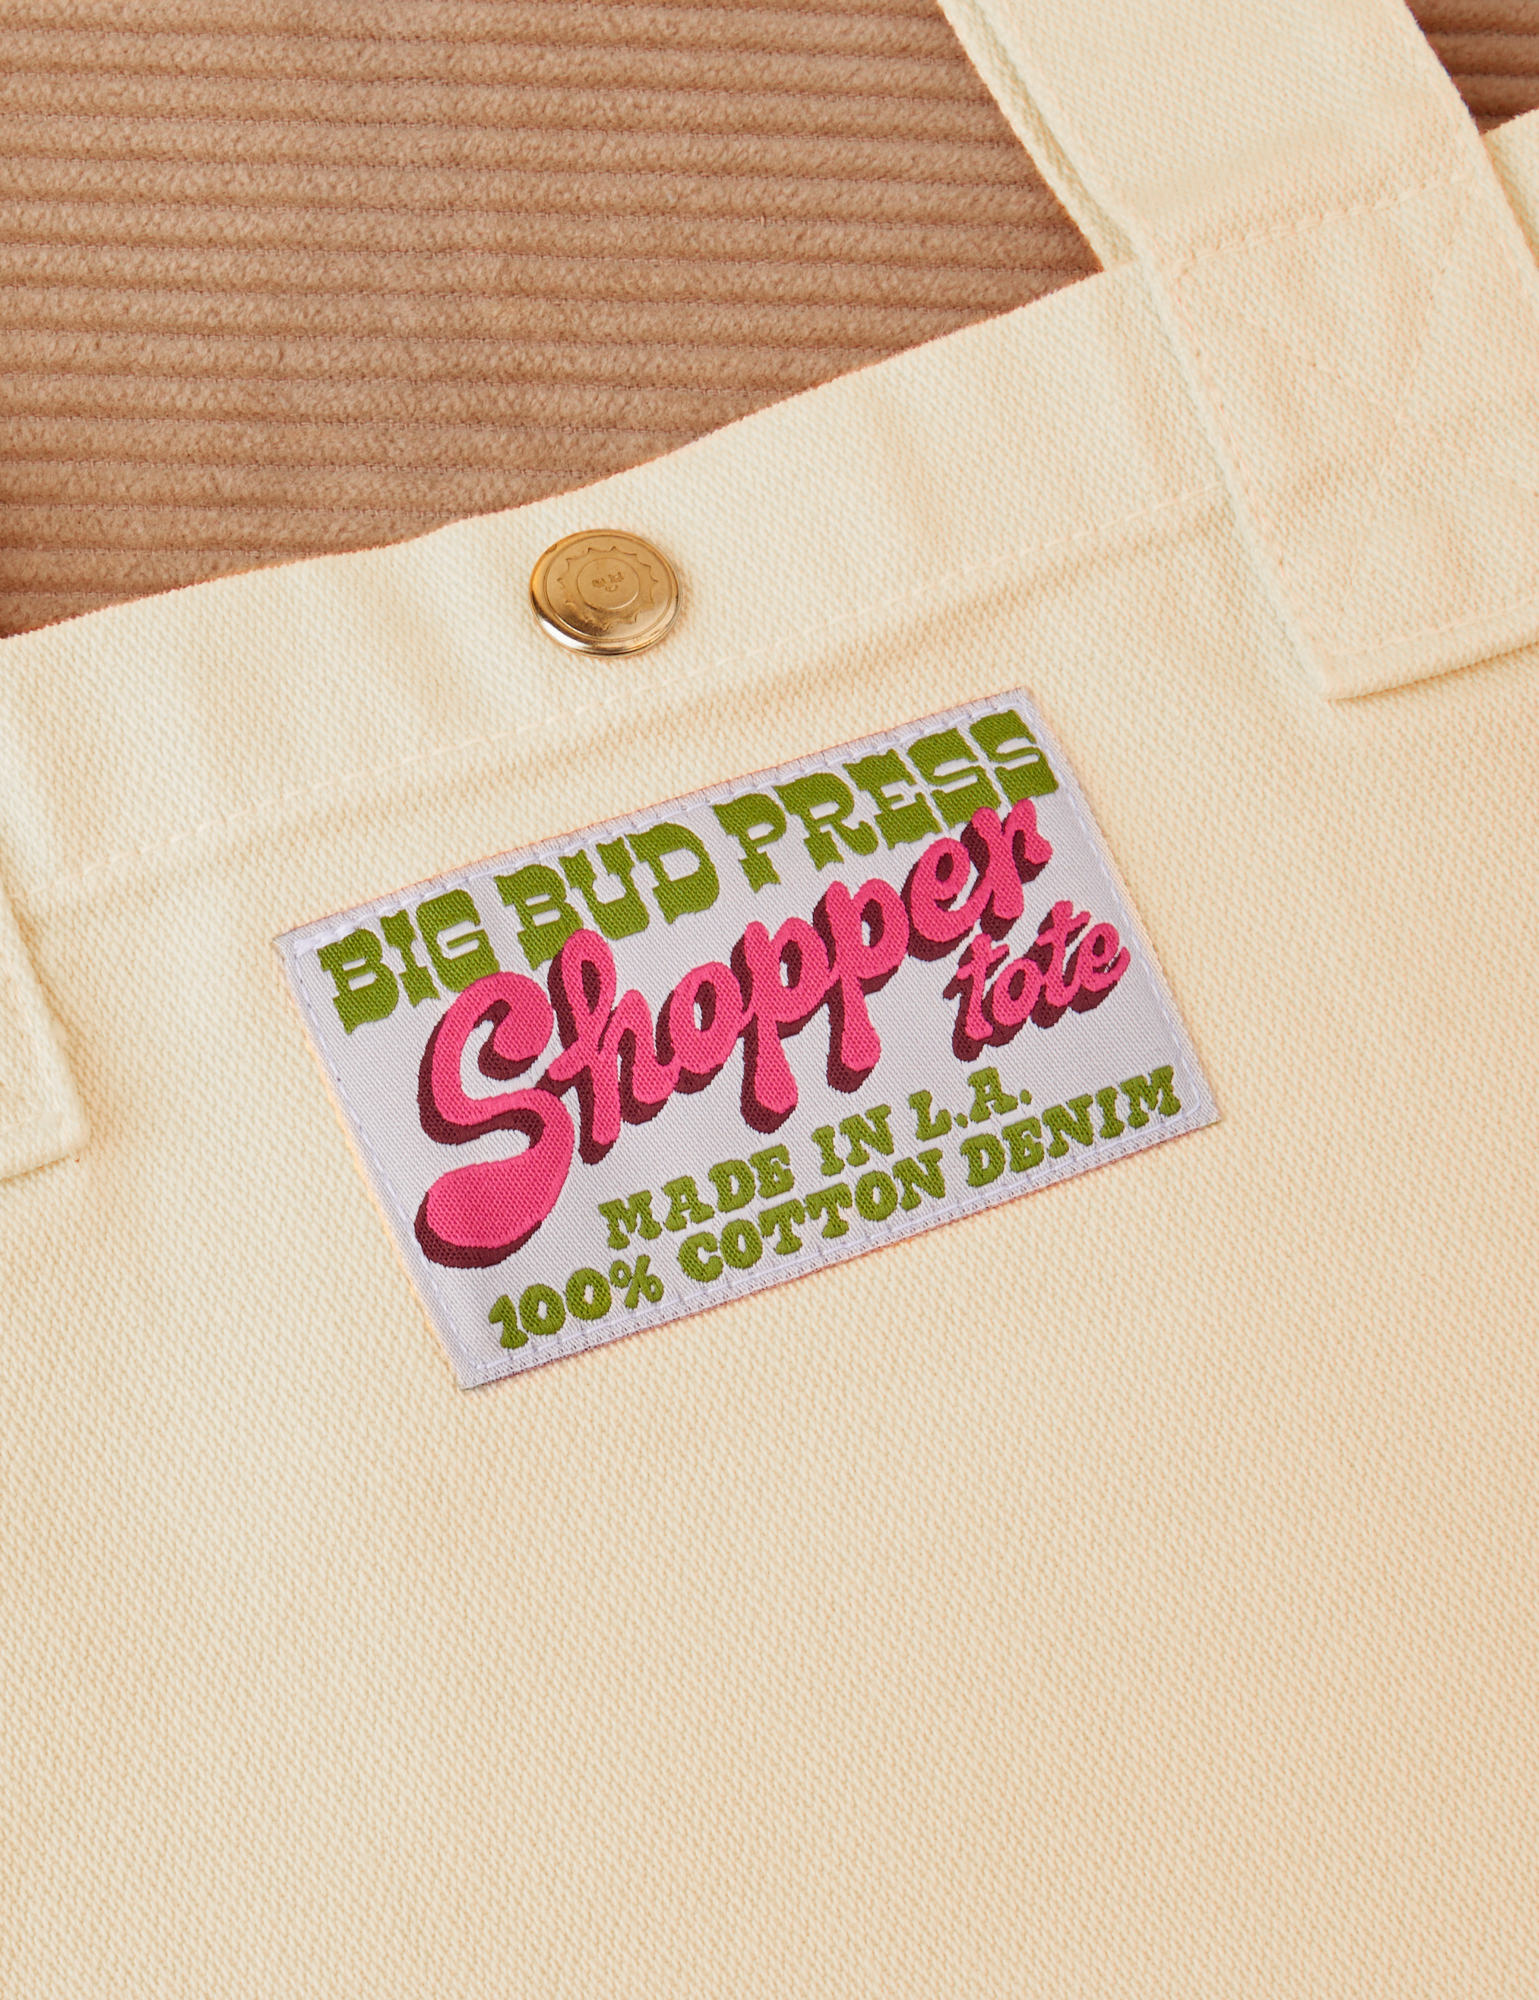 Sun Baby brass snap on Shopper Tote Bag in Vintage Off-White. Bag label with green and pink text that reads &quot;Big Bud Press Shopper Tote, Made in L.A., 100% Cotton Denim&quot; on a white background